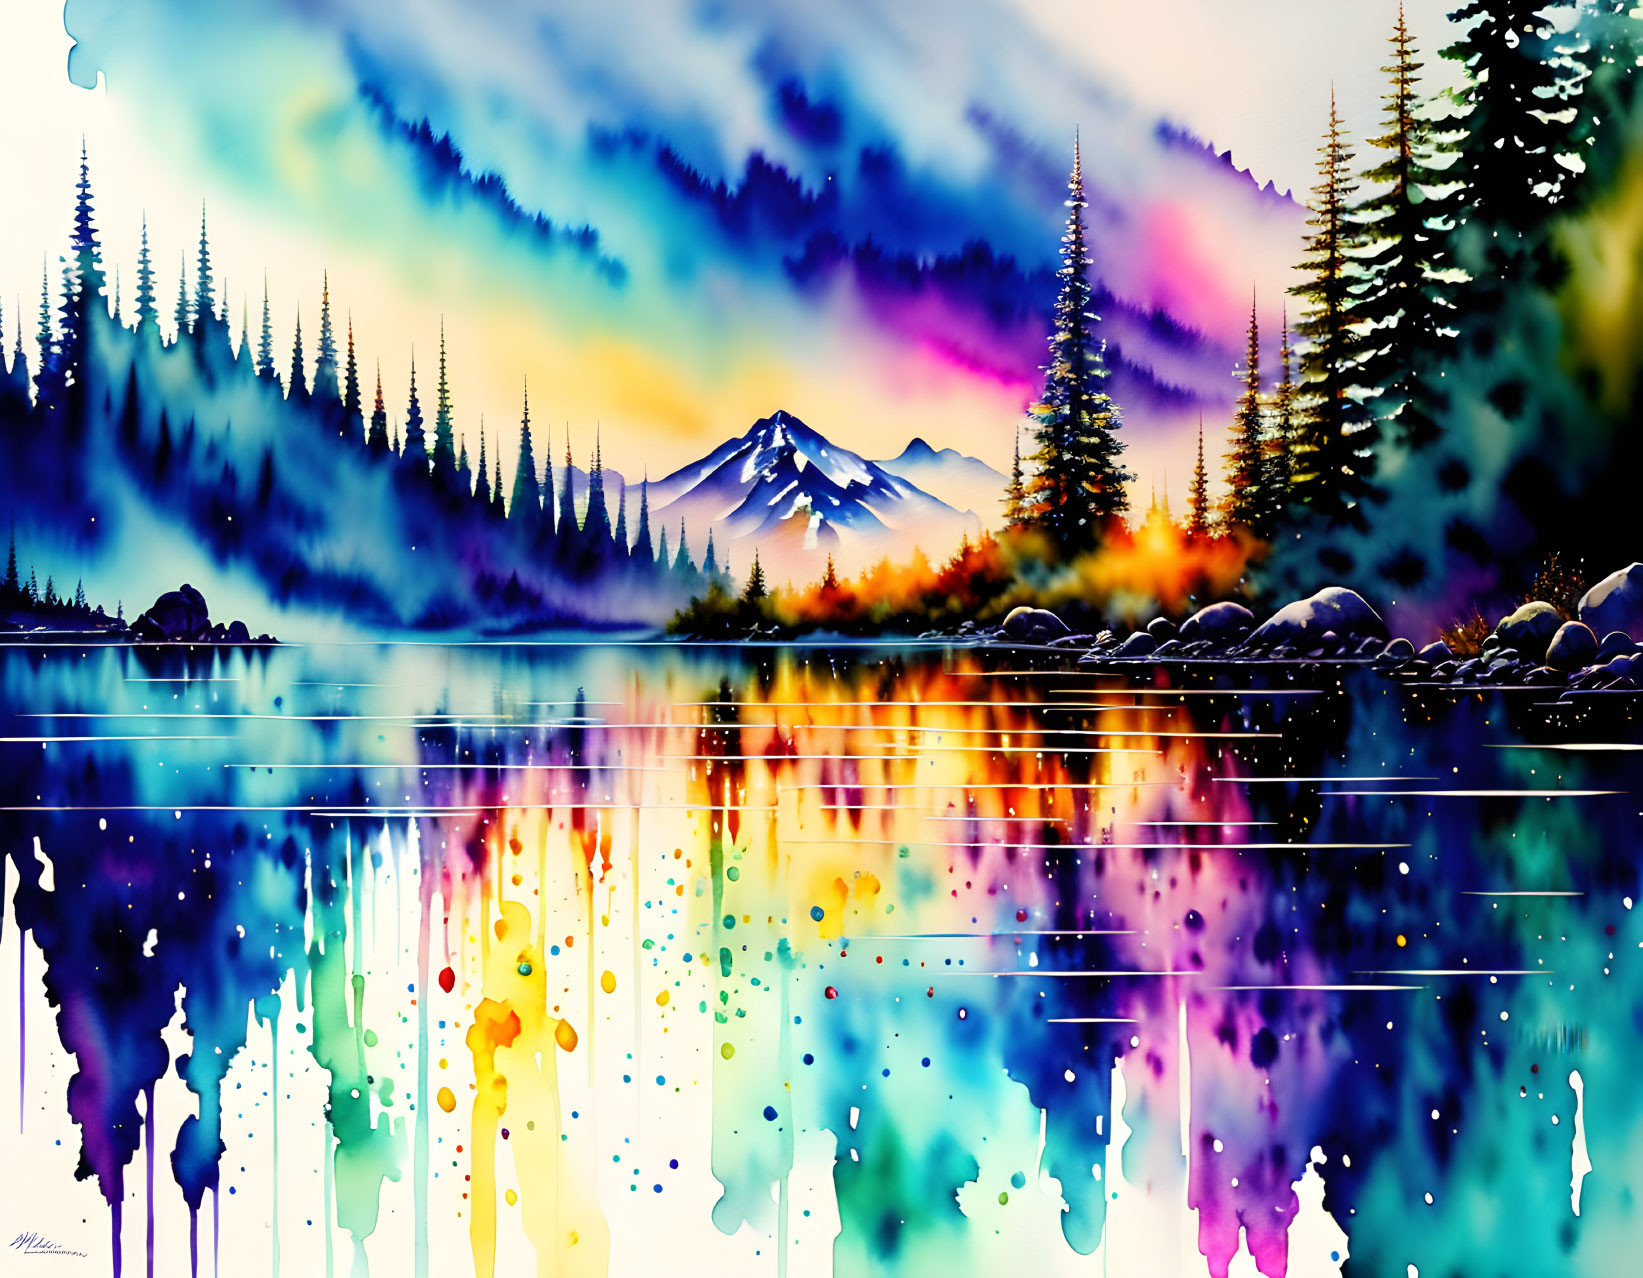 Colorful Watercolor Painting: Mountain Range, Forest, Lake